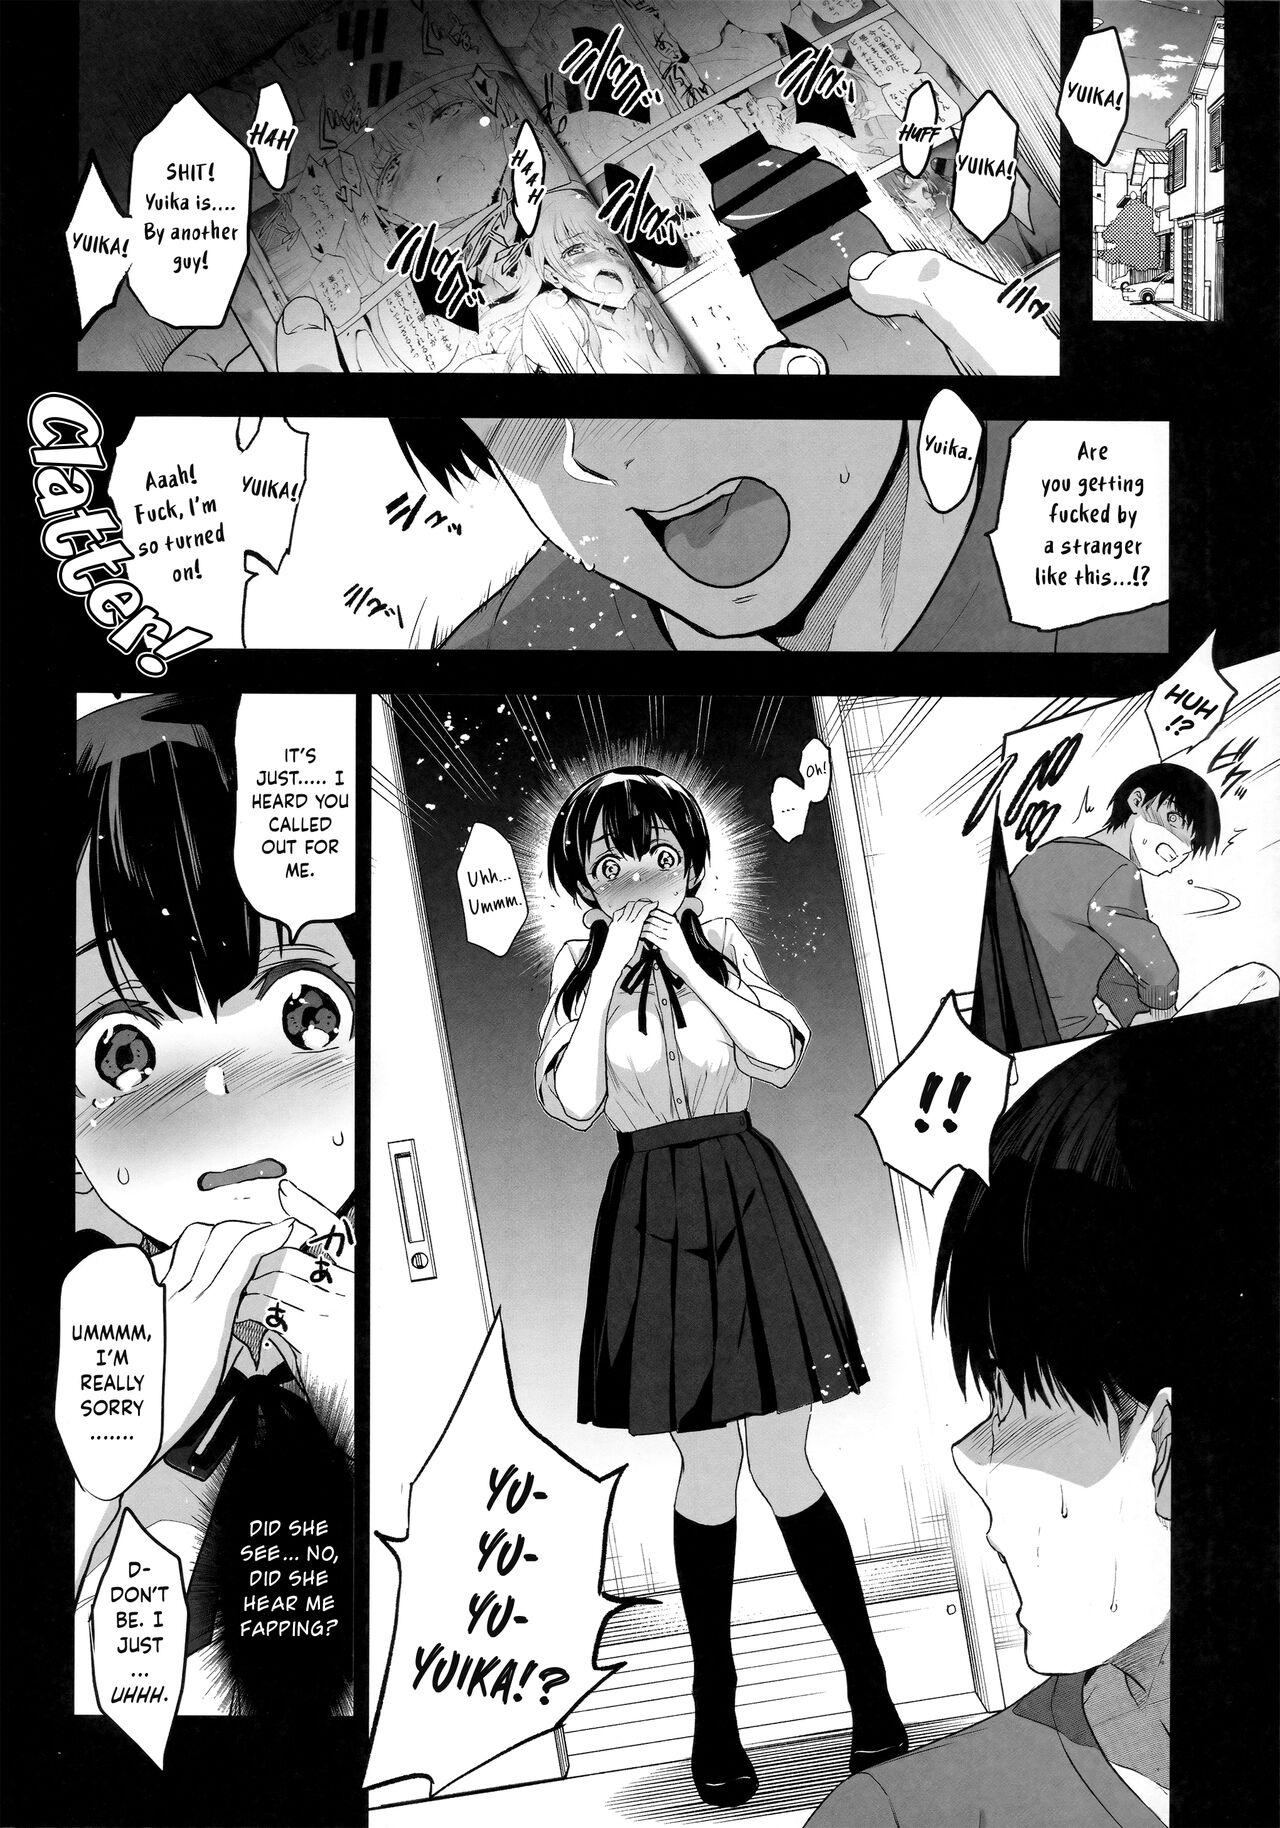 Clothed Imouto ga Boku ni Taninboux o Okutte kuru | My Little Sister Is Sending Me Her Videos Of Getting Fucked By Strangers - Original Sloppy Blow Job - Page 7